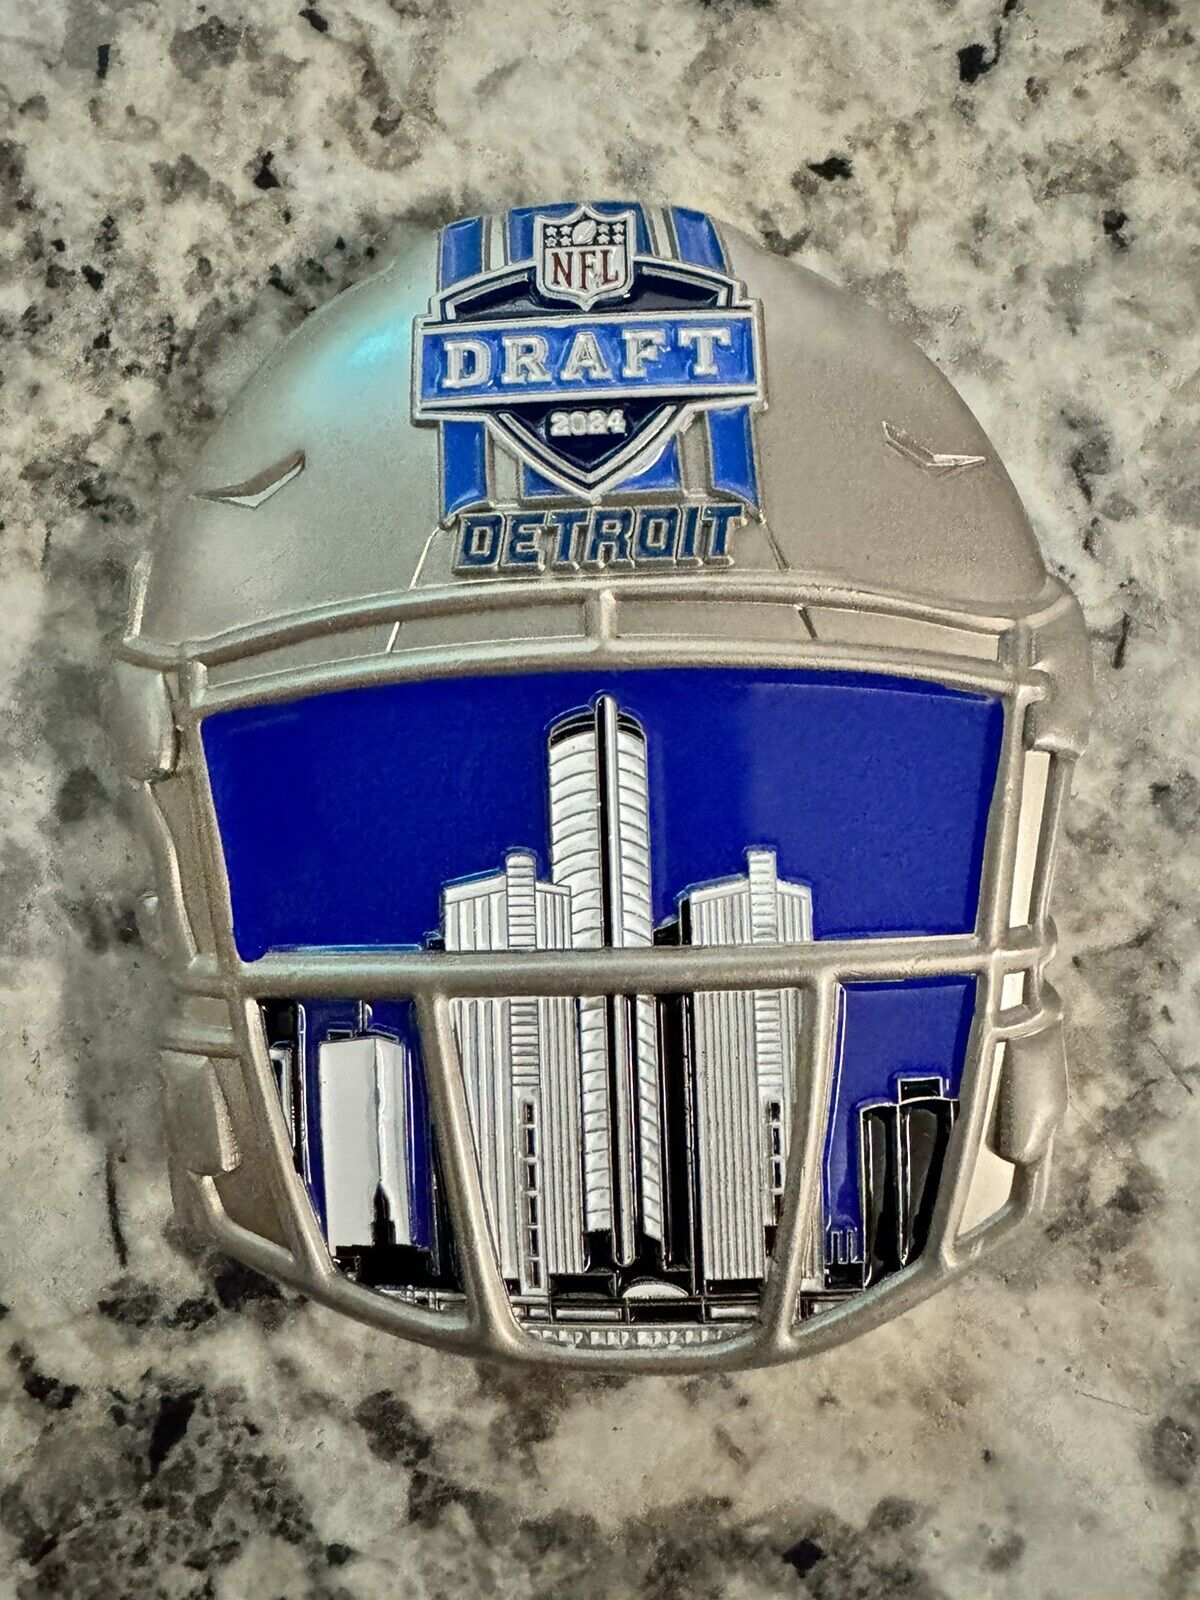 ATF Detroit NFL Draft 3”Challenge Coin Only 120 Made Rare.